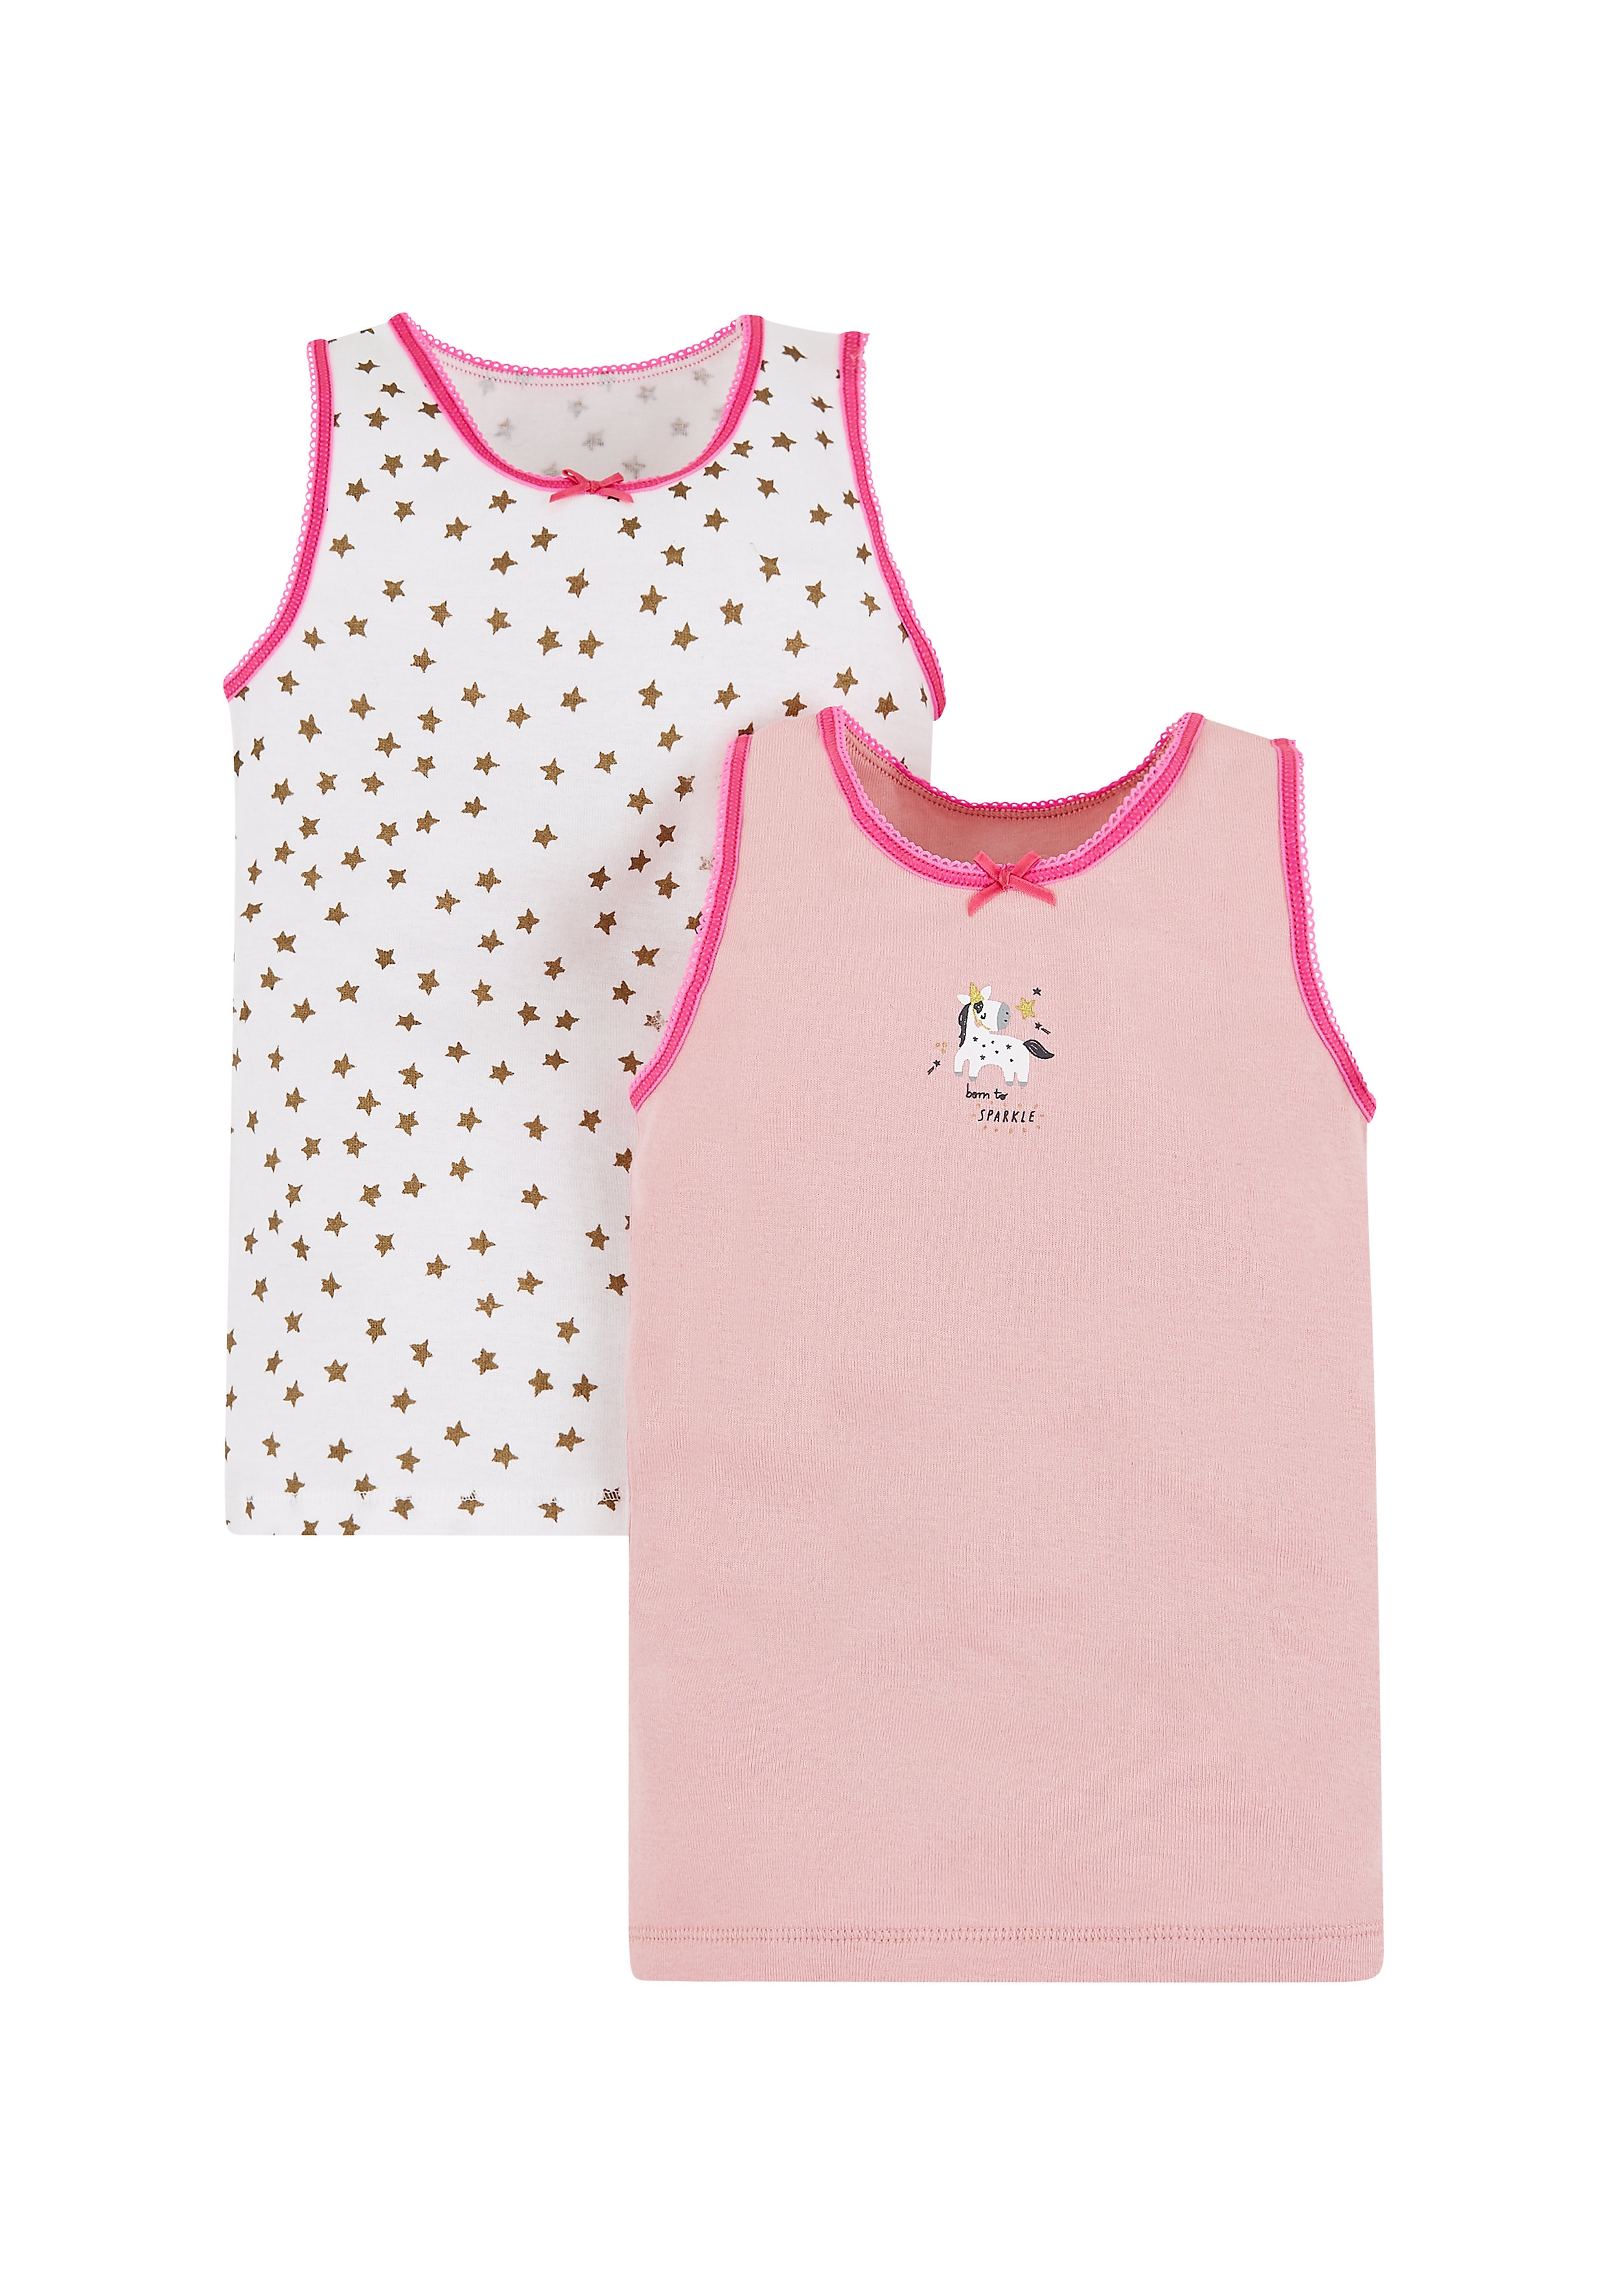 Mothercare | Girls Pink Unicorn Vests - 2 Pack - Multicolor